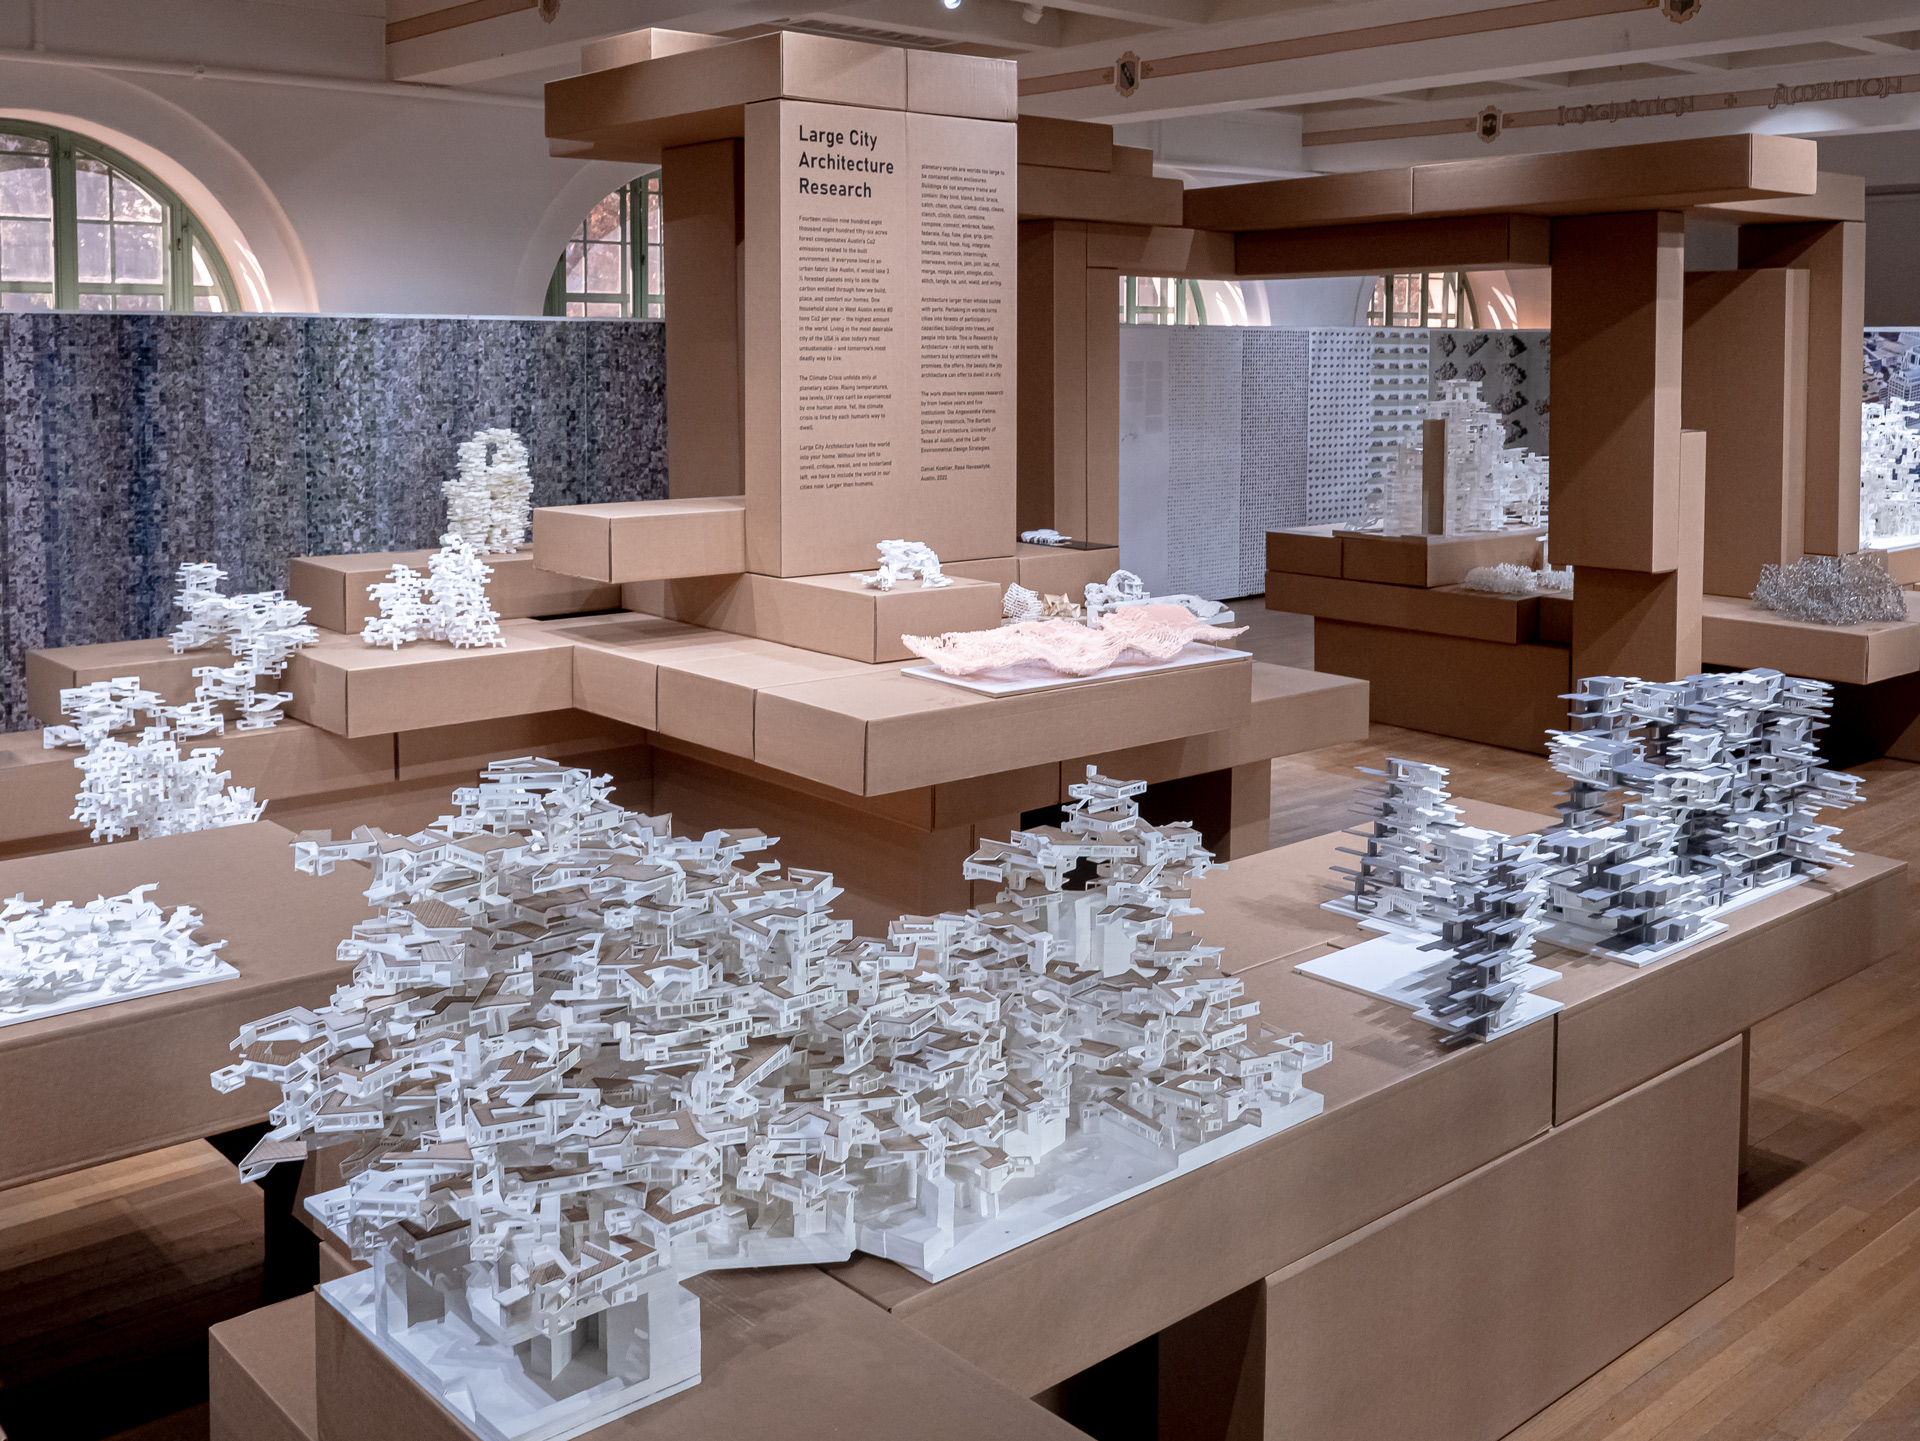 Large City Architecture Research Exhibition - Lab for Environmental Design  Strategies